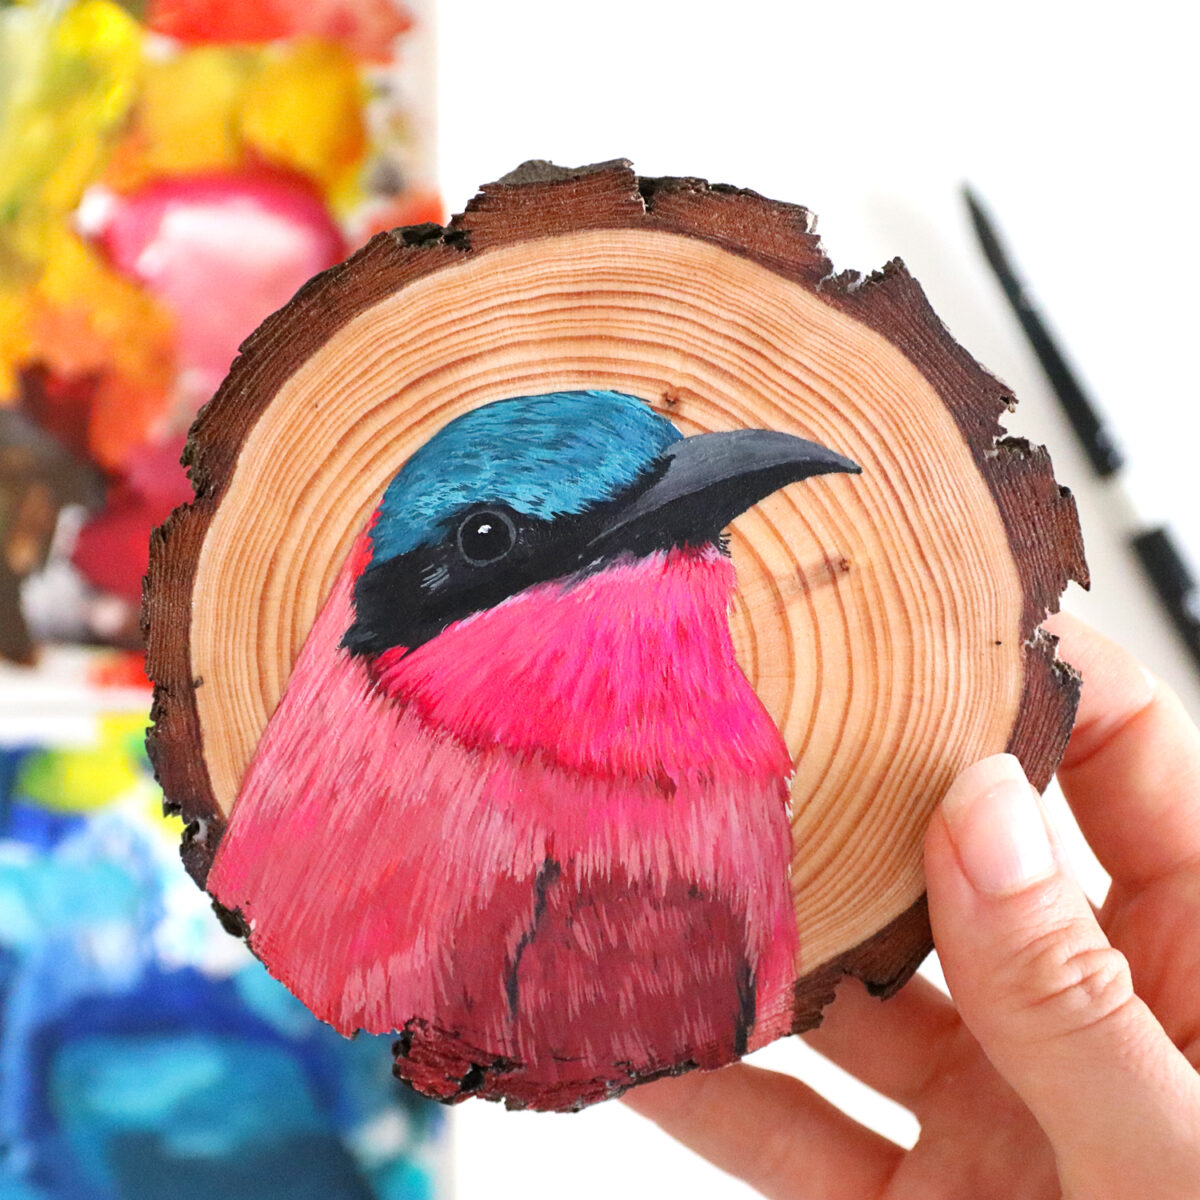 100 Days Of Birds A Marvelous Series Of Gouache On Wood Paintings By Deanna Maree (23)